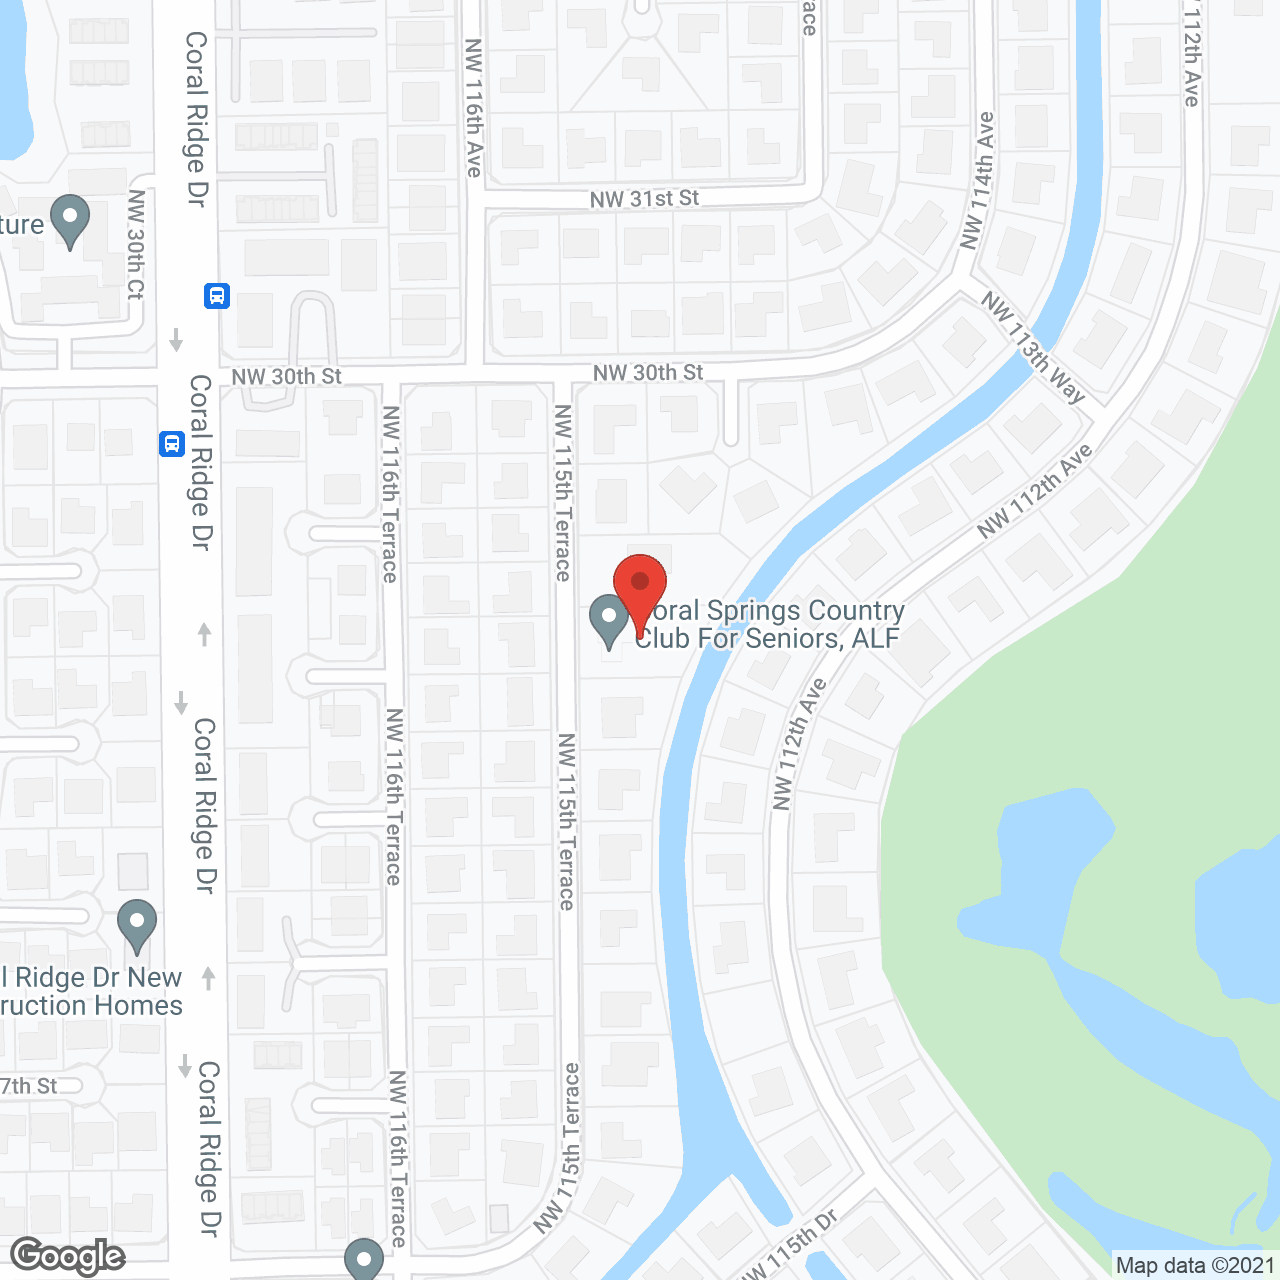 Coral Springs Country Club for Seniors in google map